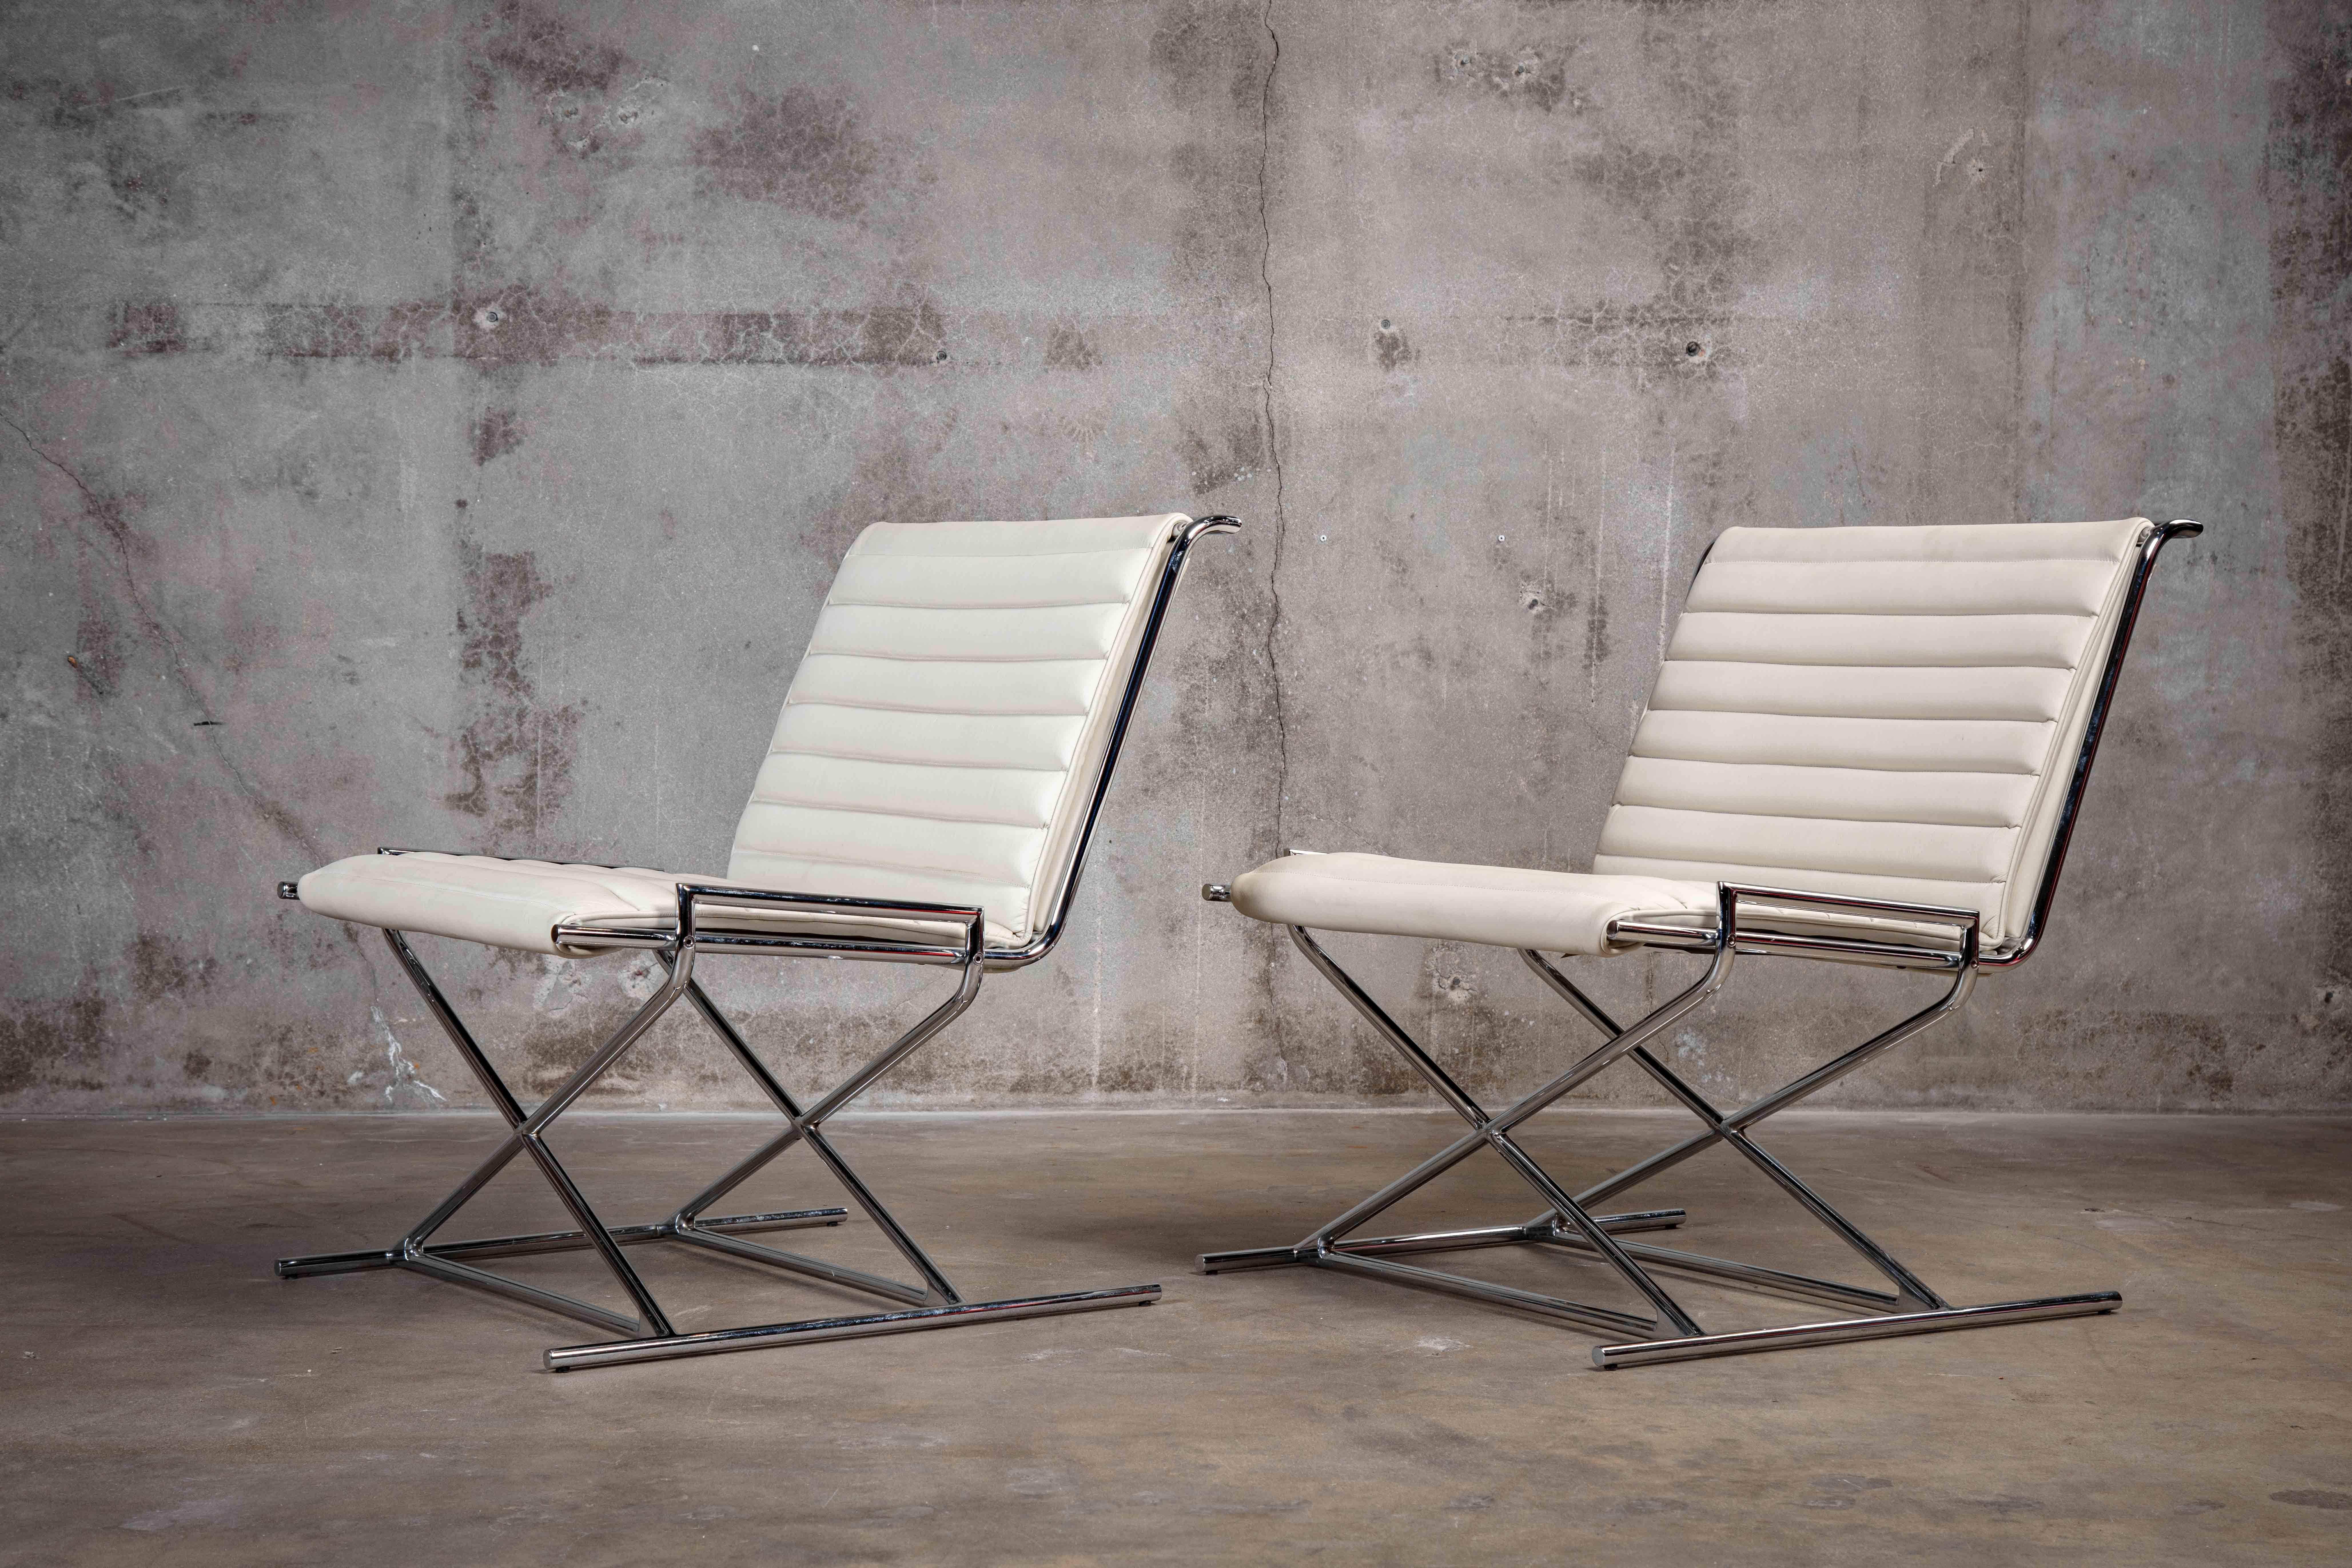 Pair of Ward Bennett (1917-2003) for Geiger sled lounge chairs in leather and steel

Measure: Seat 16 1/2